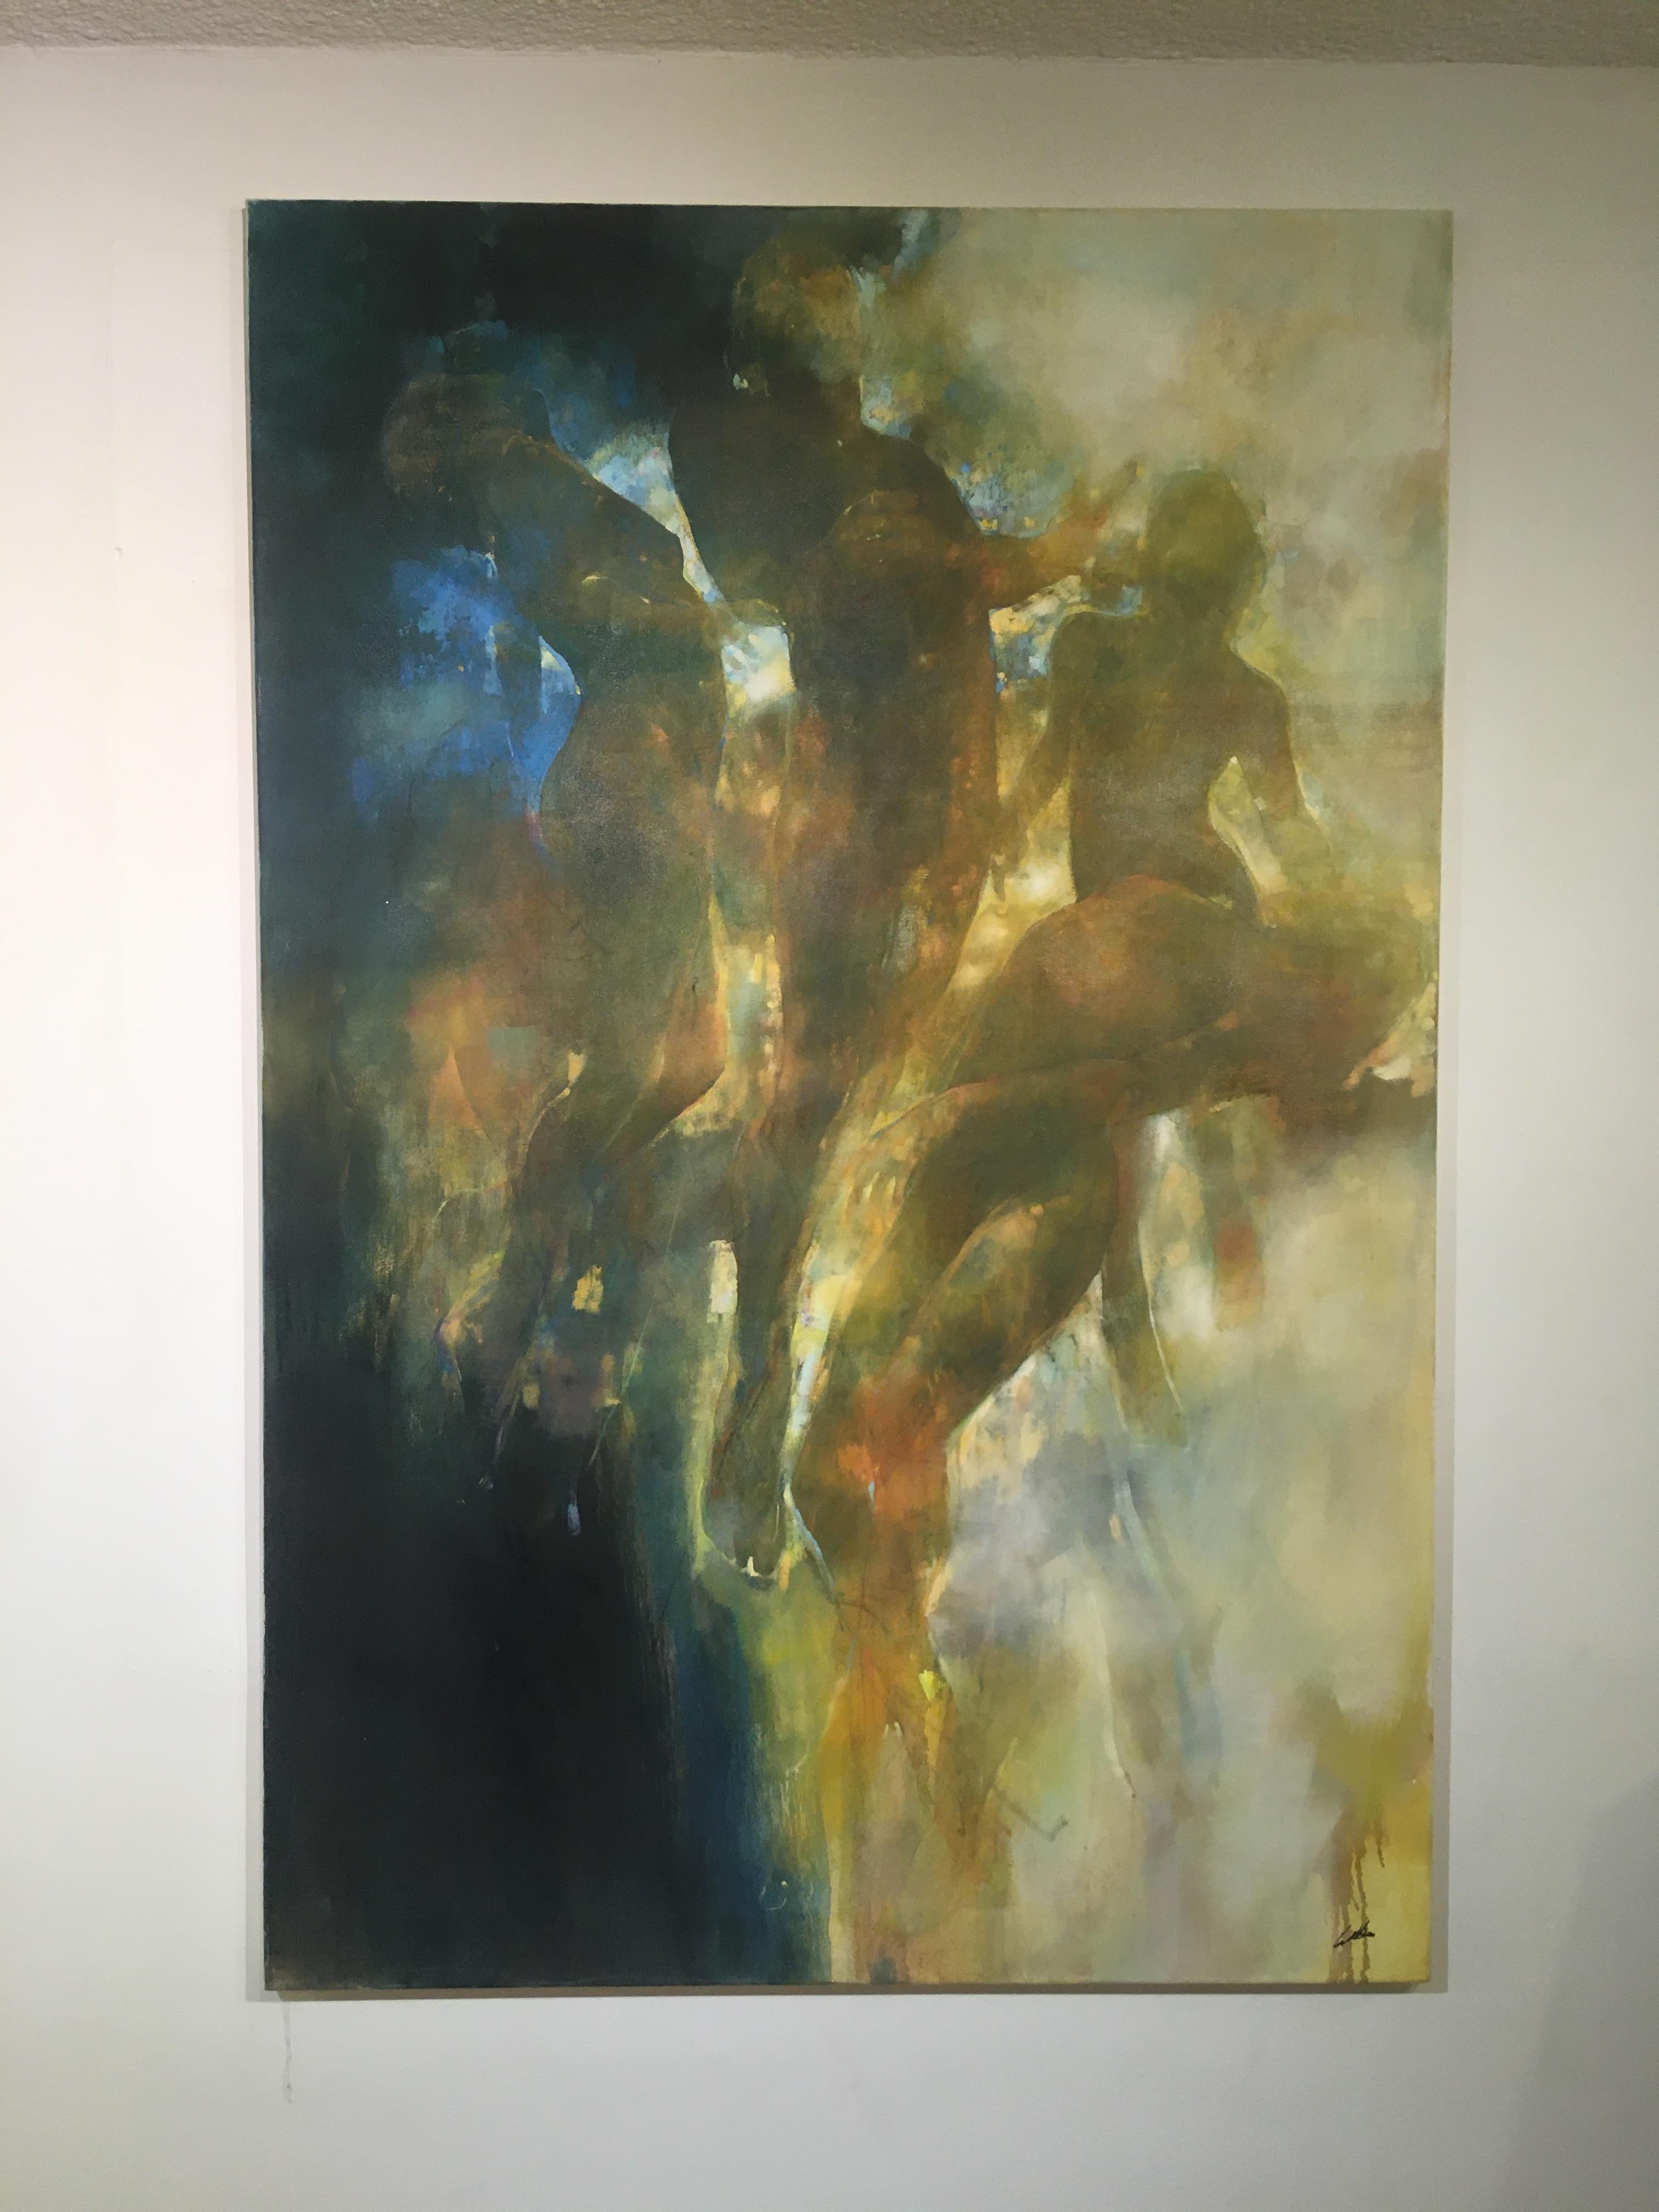 Radiance - contemporary underwater figures movement oil painting unframed - Painting by Bill Bate